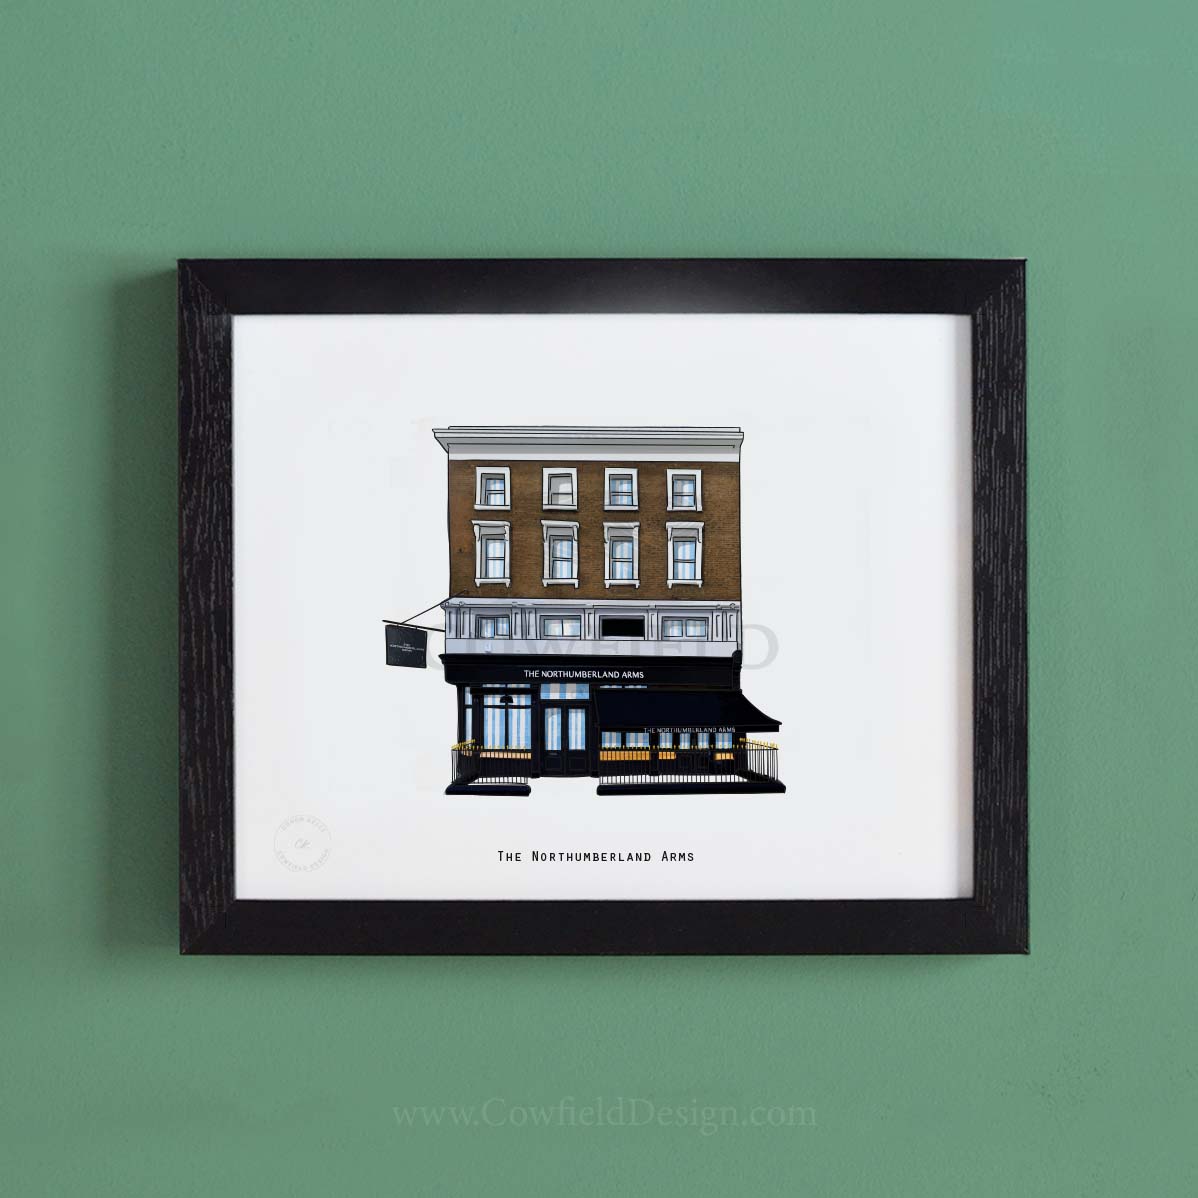 The Northumberland Arms - London Requested Pubs 6th